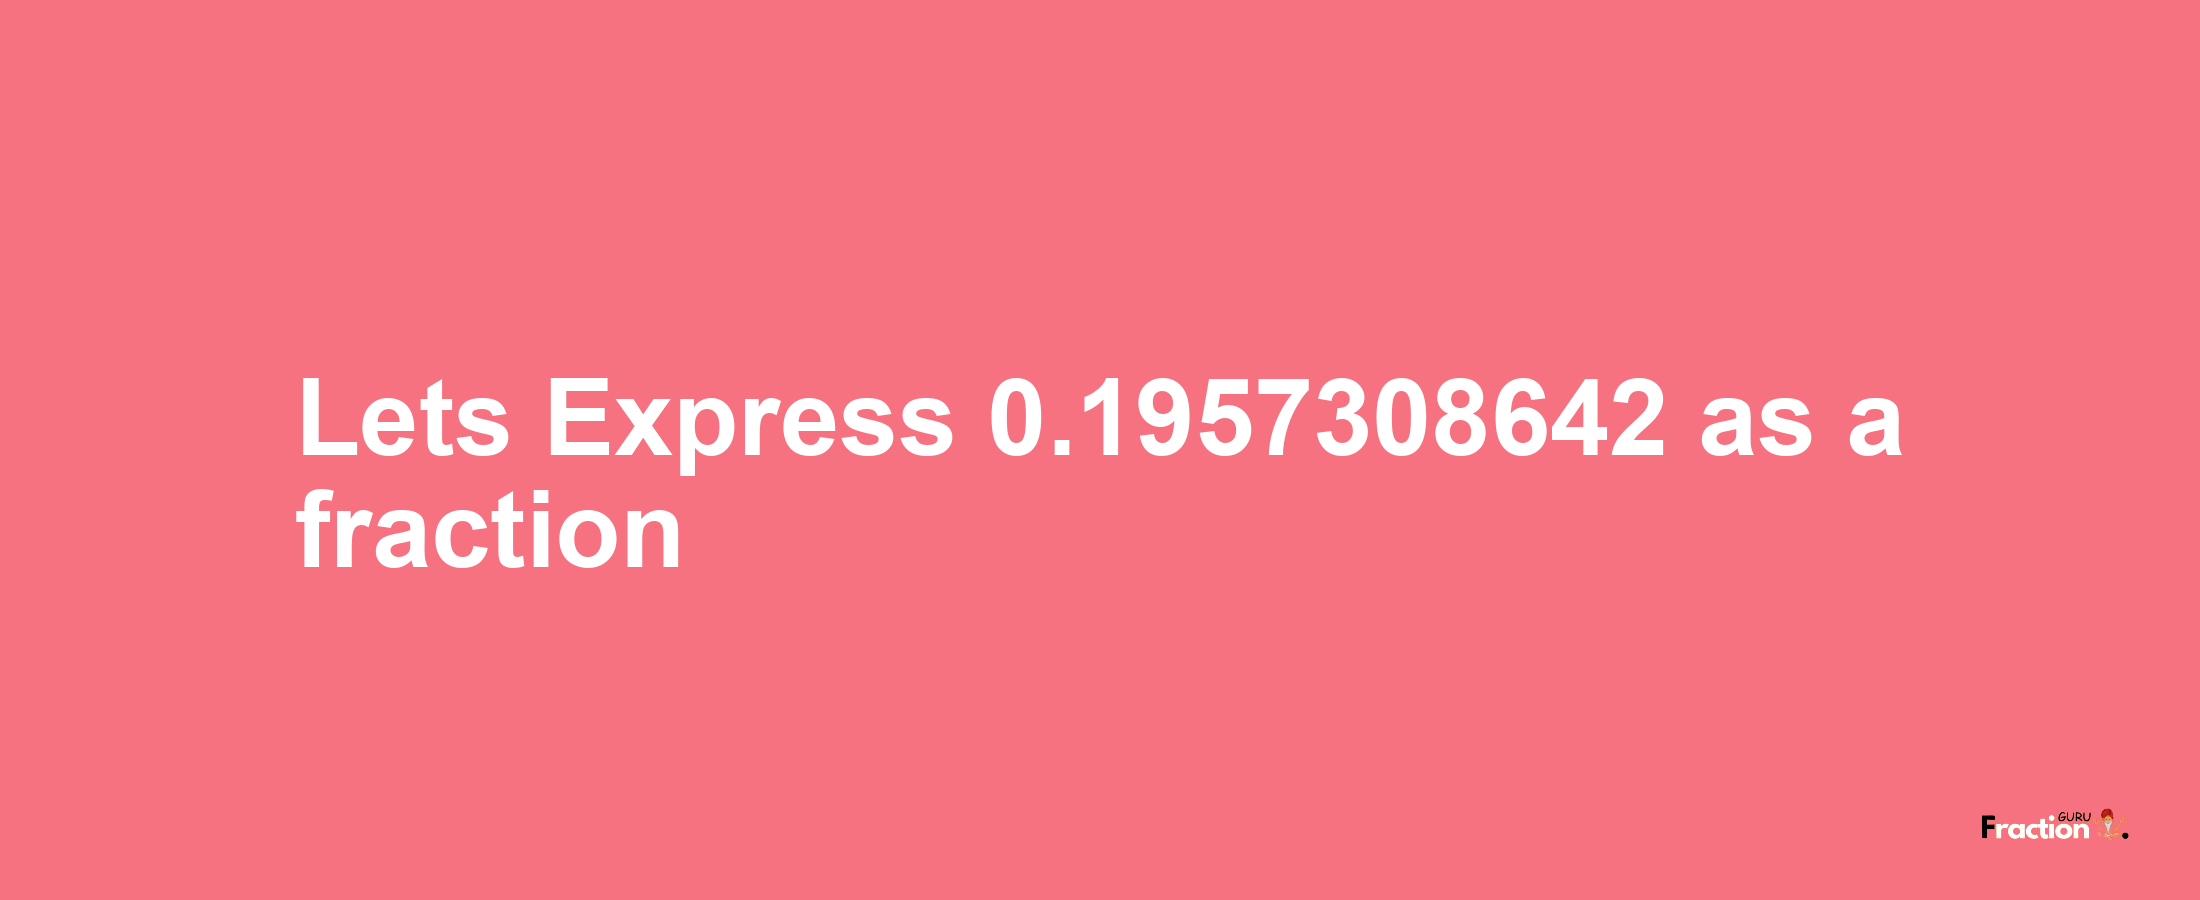 Lets Express 0.1957308642 as afraction